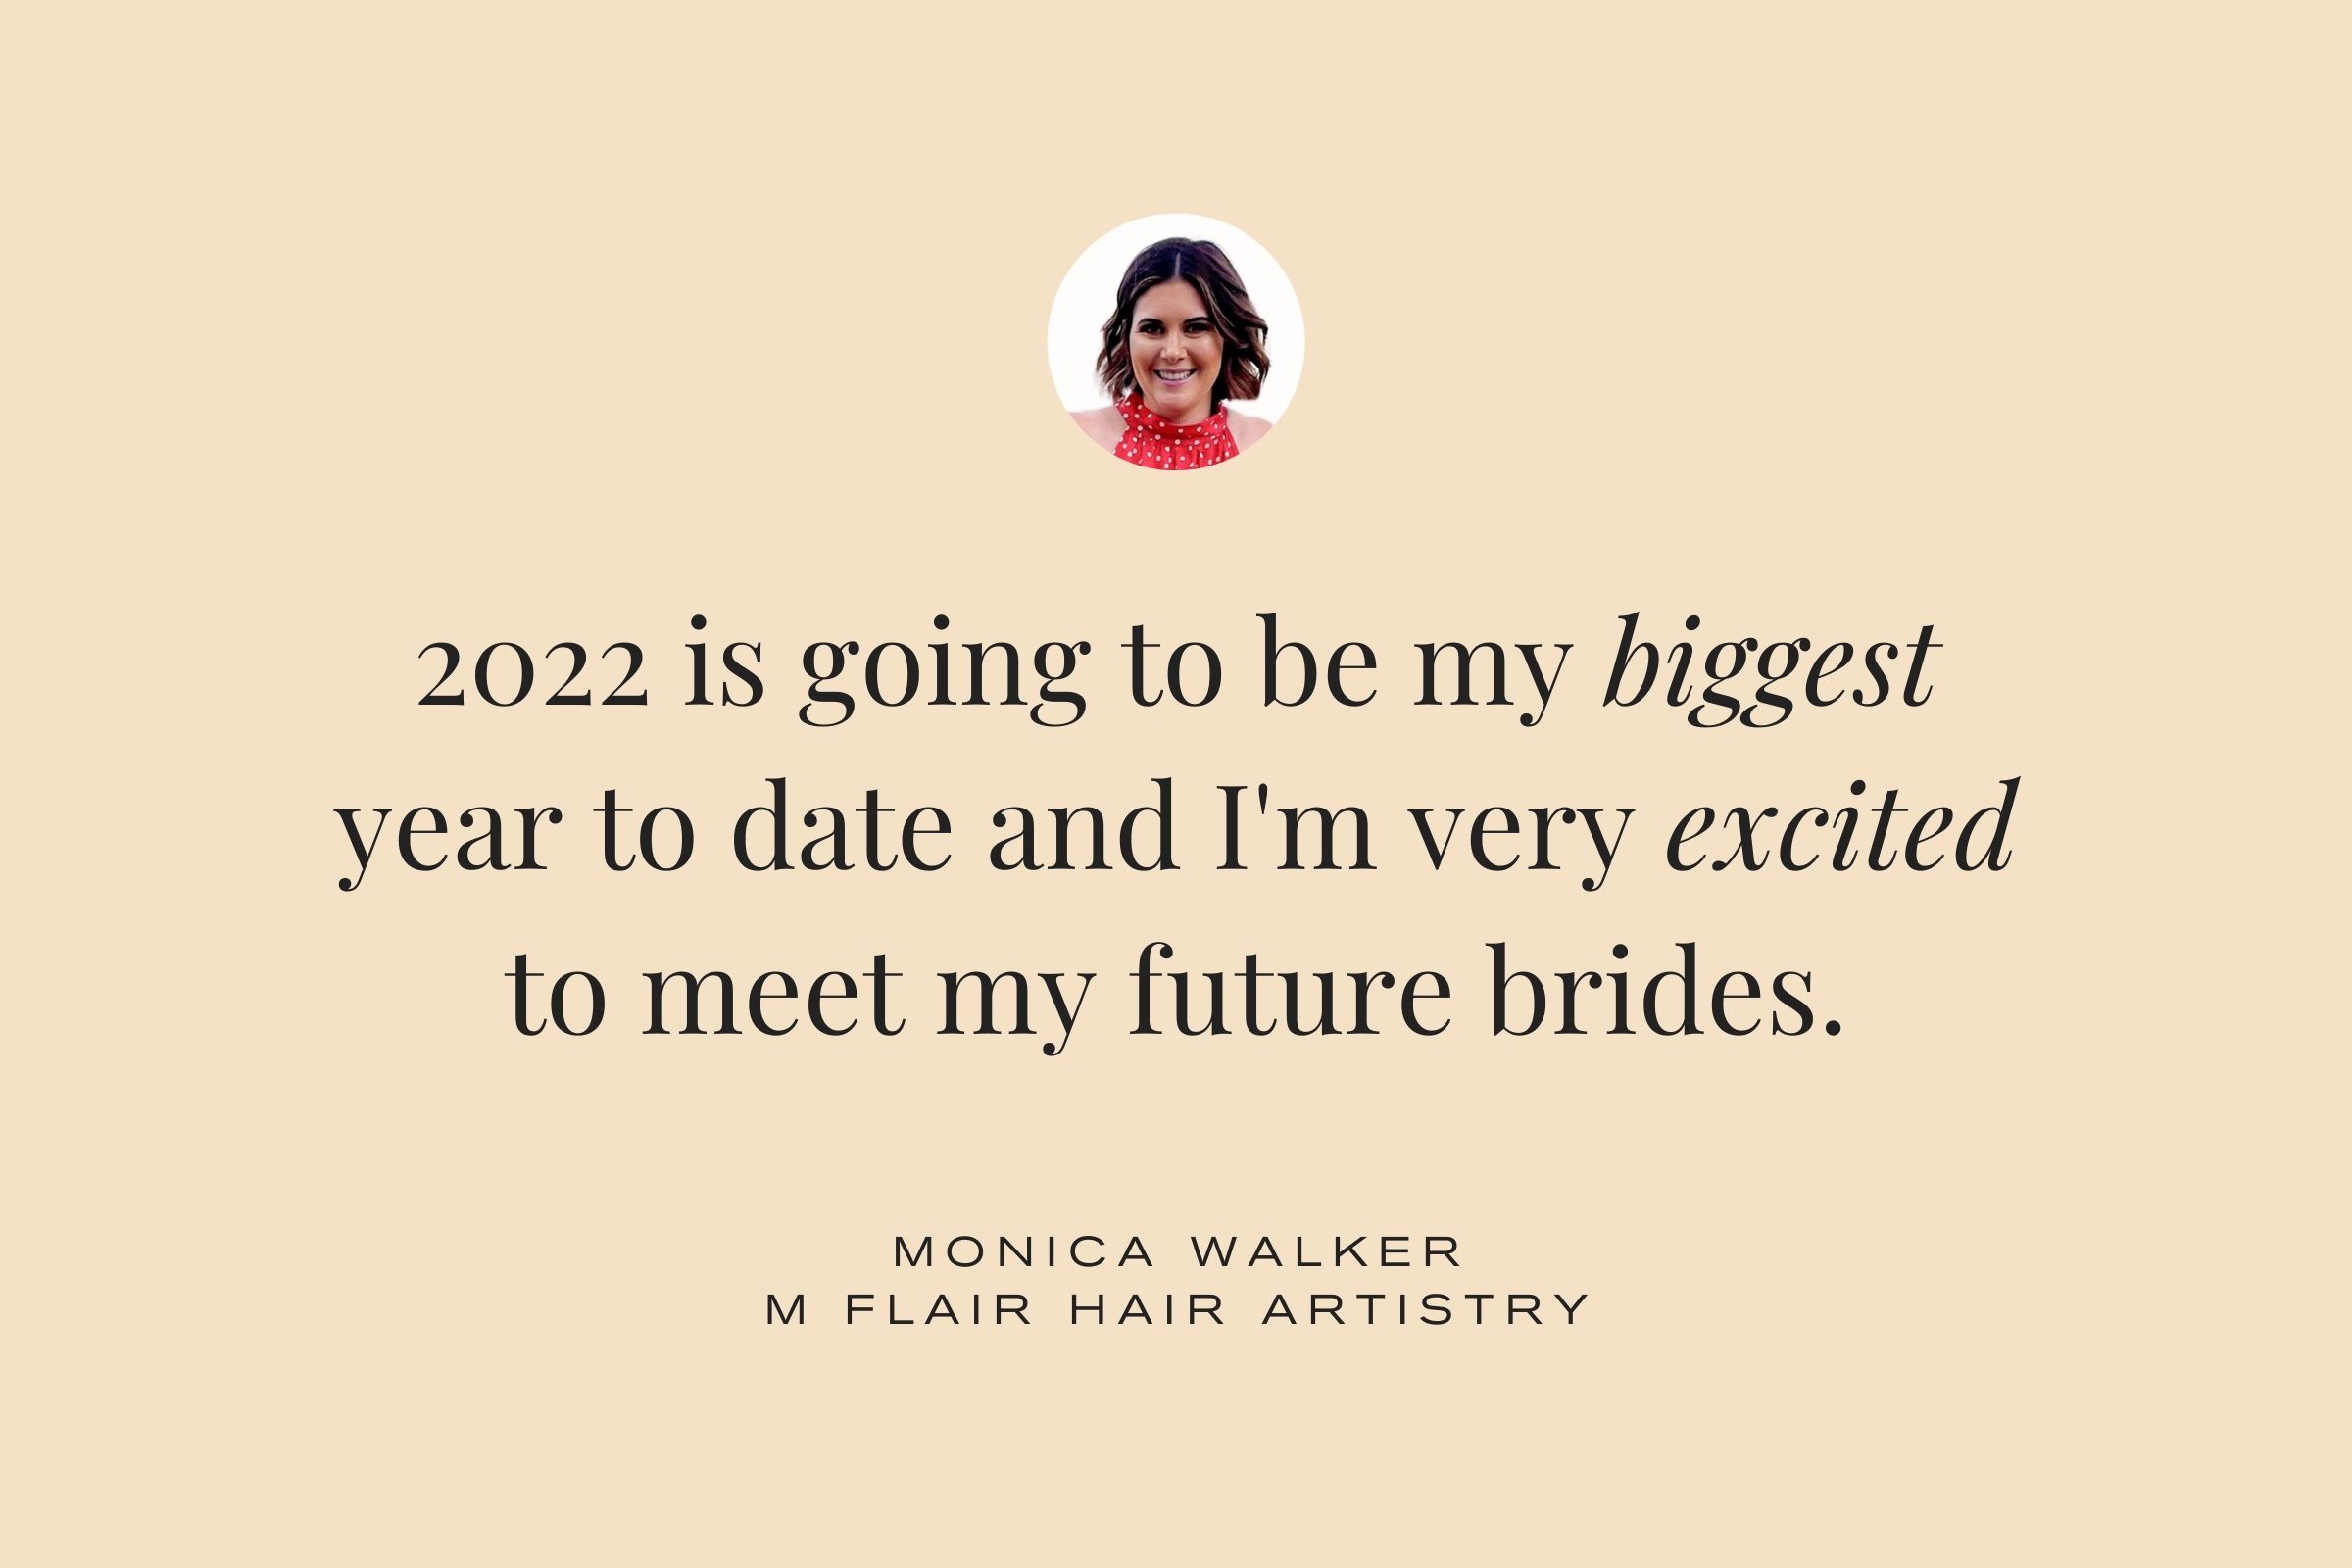 Monica Walker, M Flair Hair Artistry: 2022 is going to be my biggest year to date.